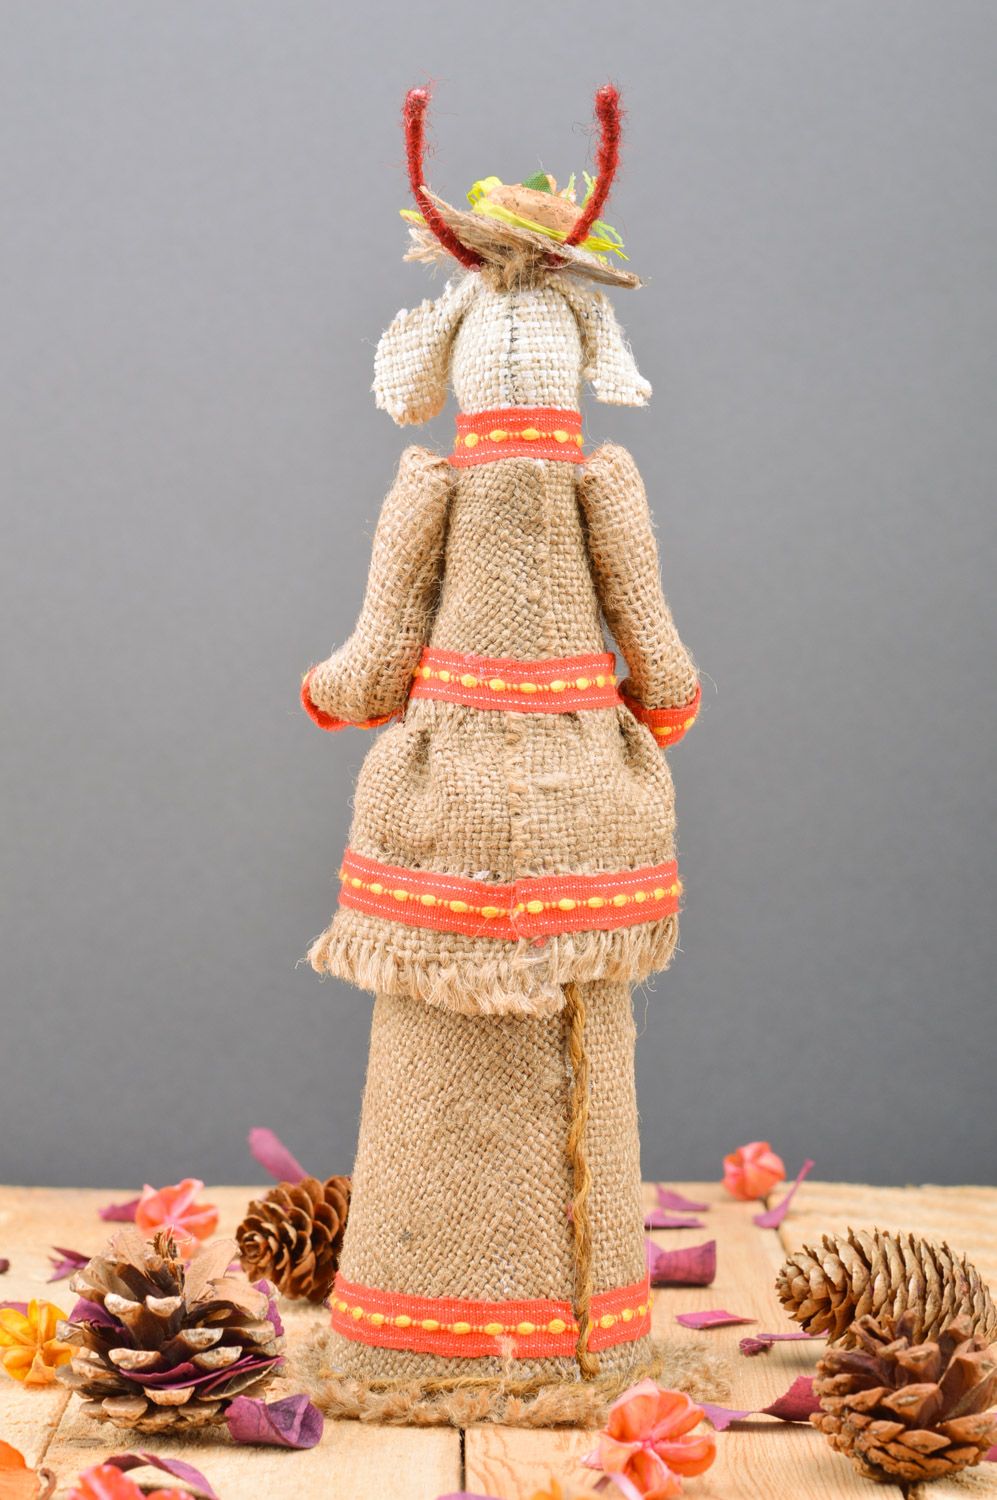 Handmade interior doll in the shape of bottle cozy sewn of burlap Goat with Hat photo 2